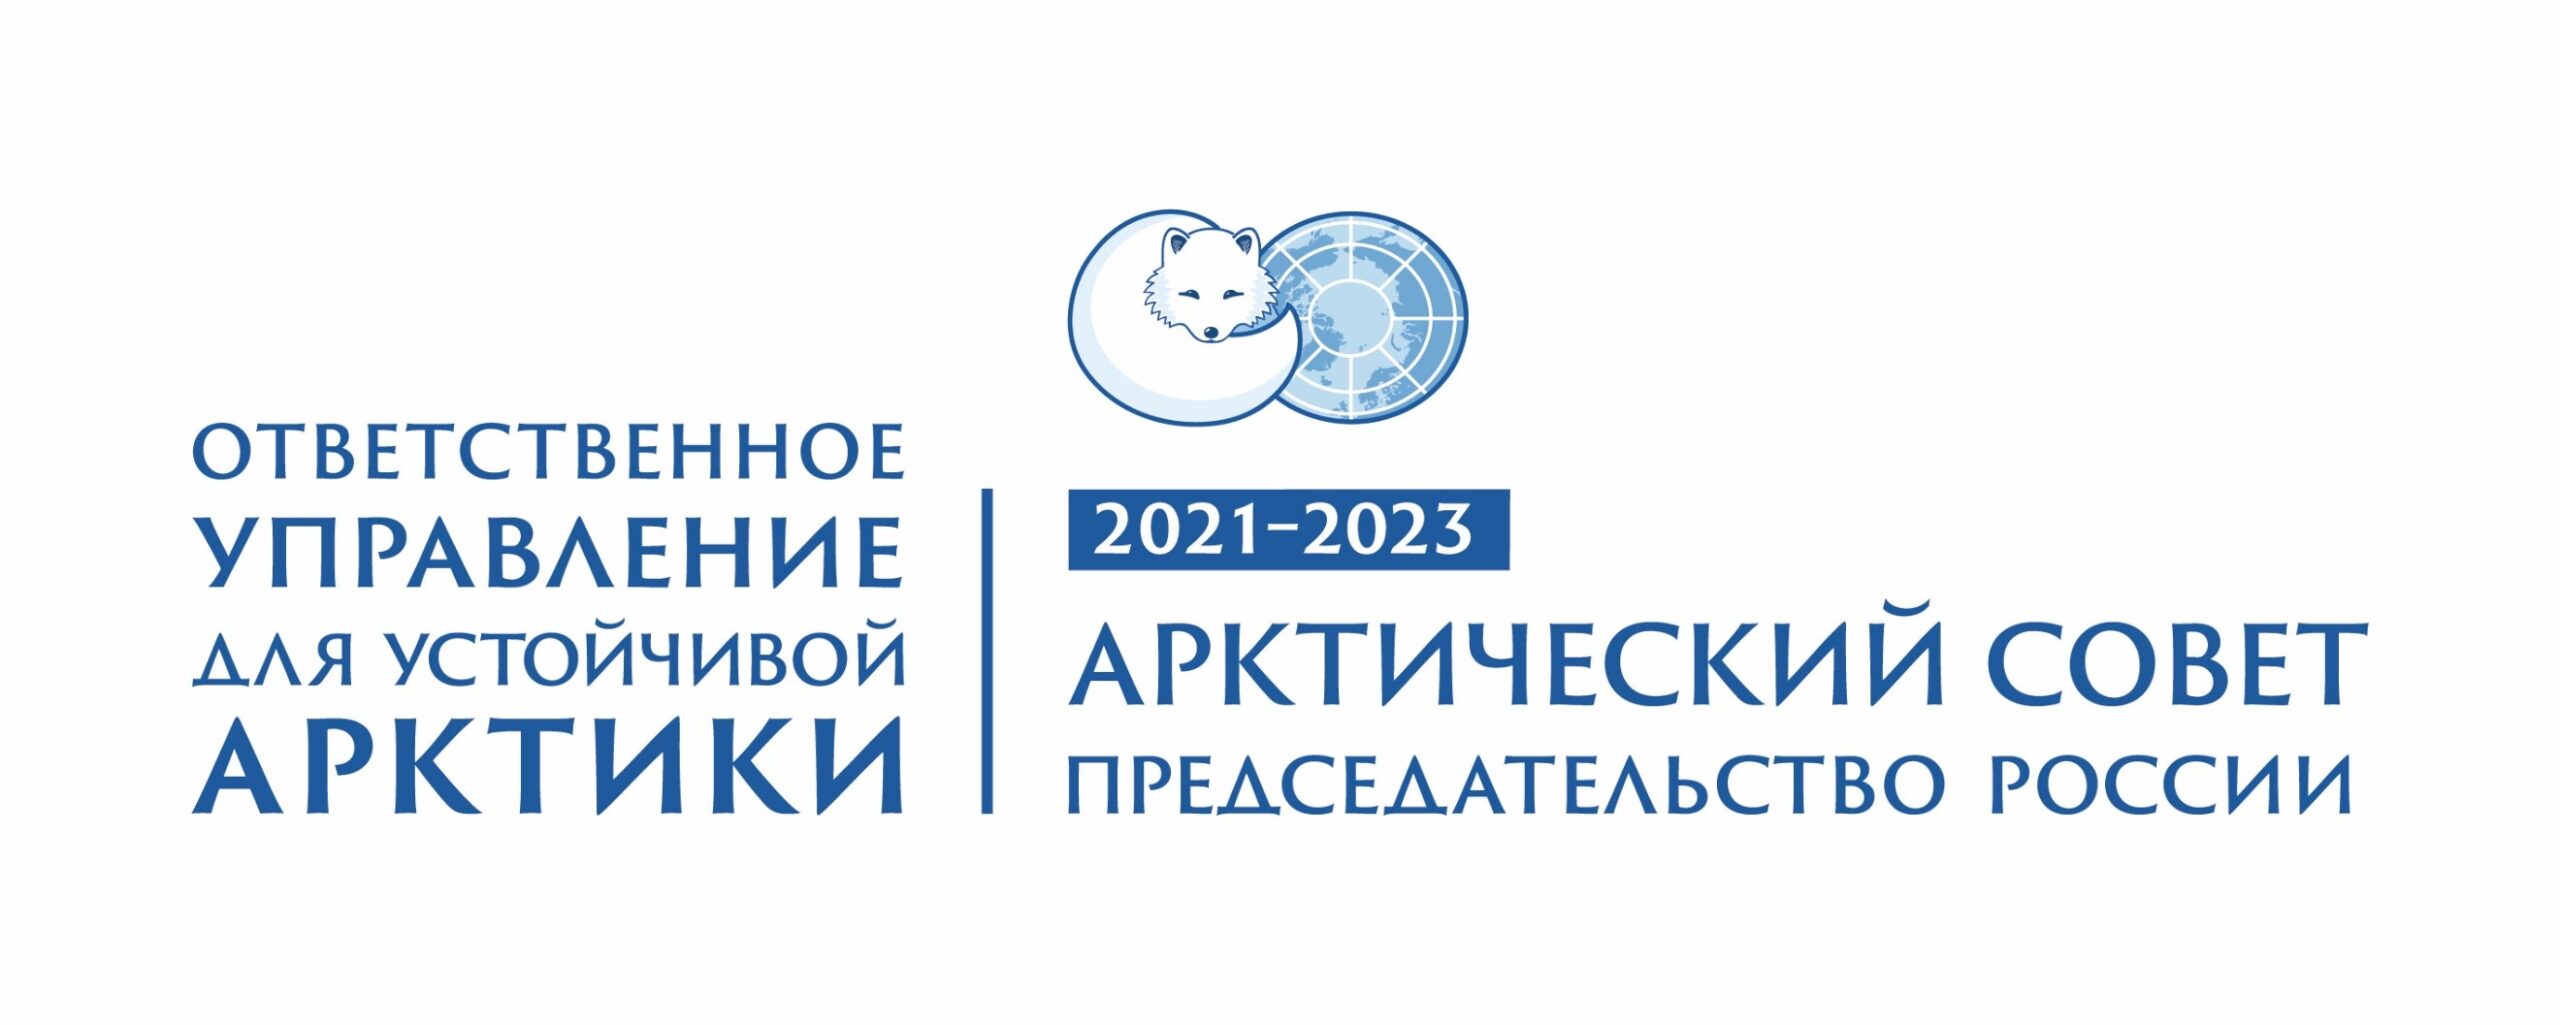 Russia Completes a Busy First Year as Chairperson of the Arctic Council Chairmanship